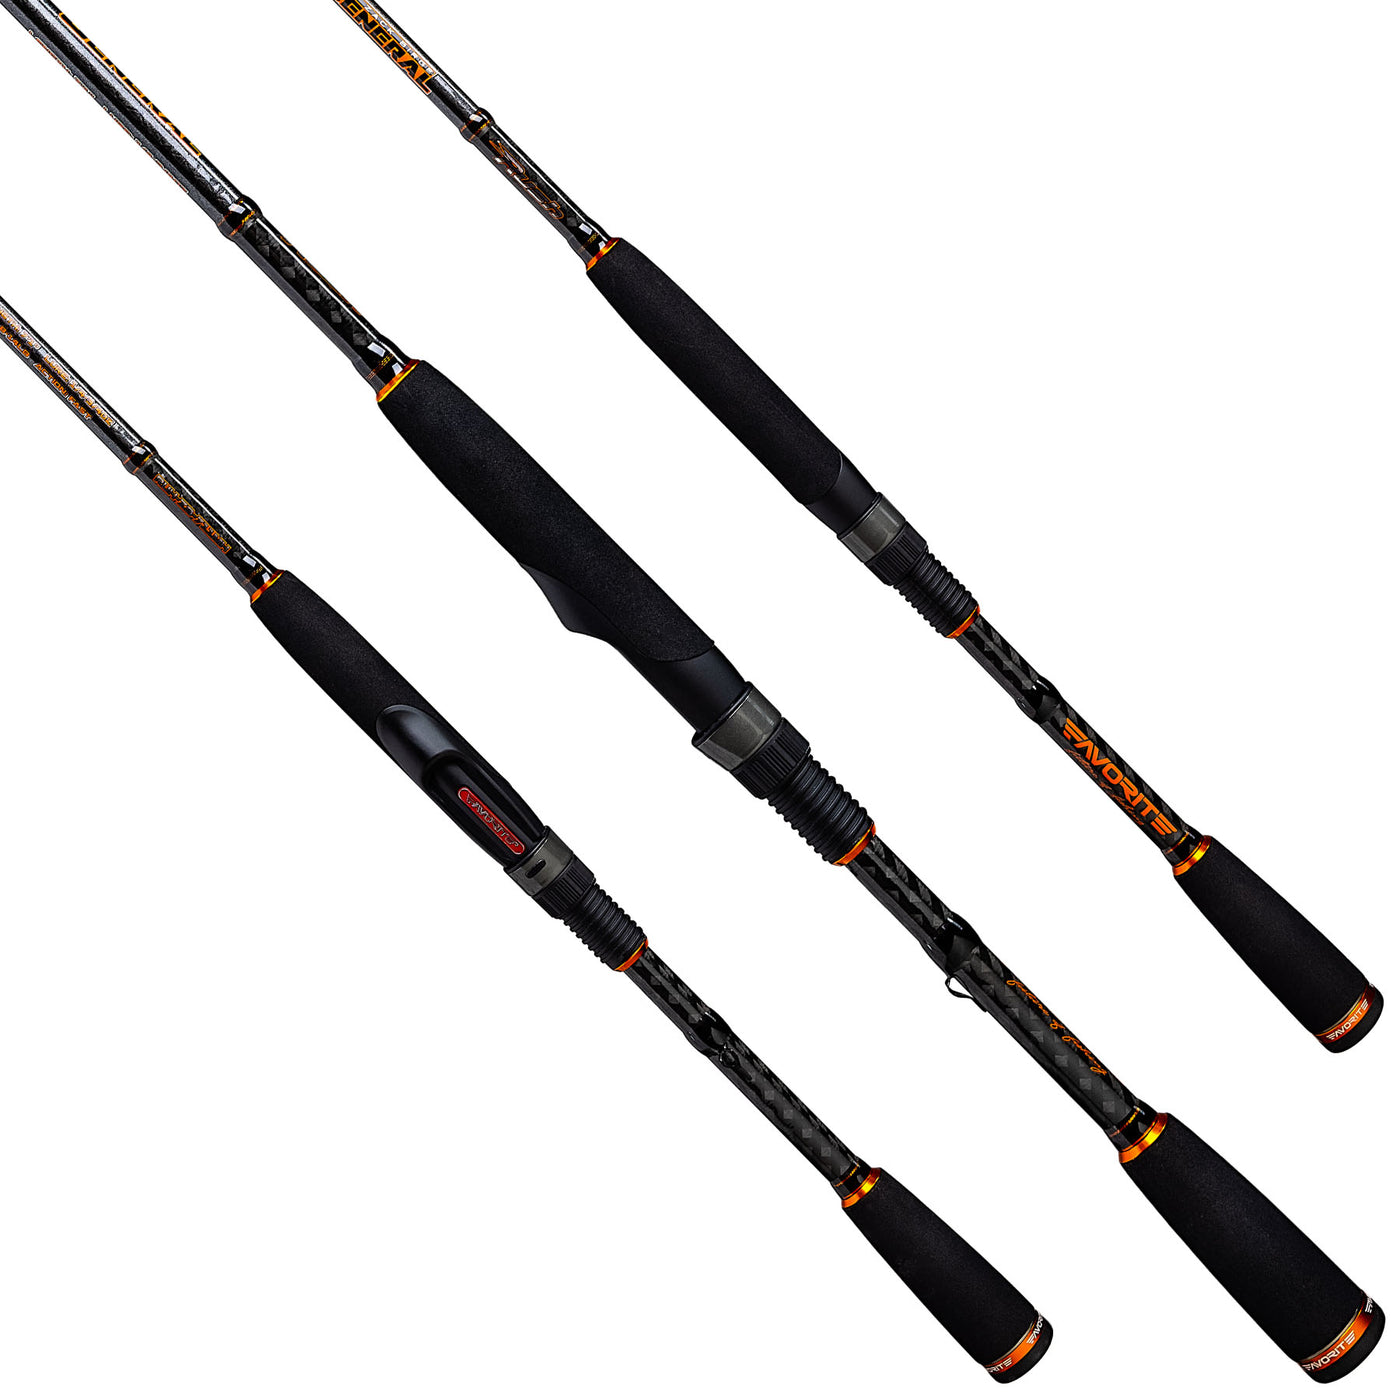 Signature Series: Zack Birge Casting and Spinning Rods Favorite Fishing